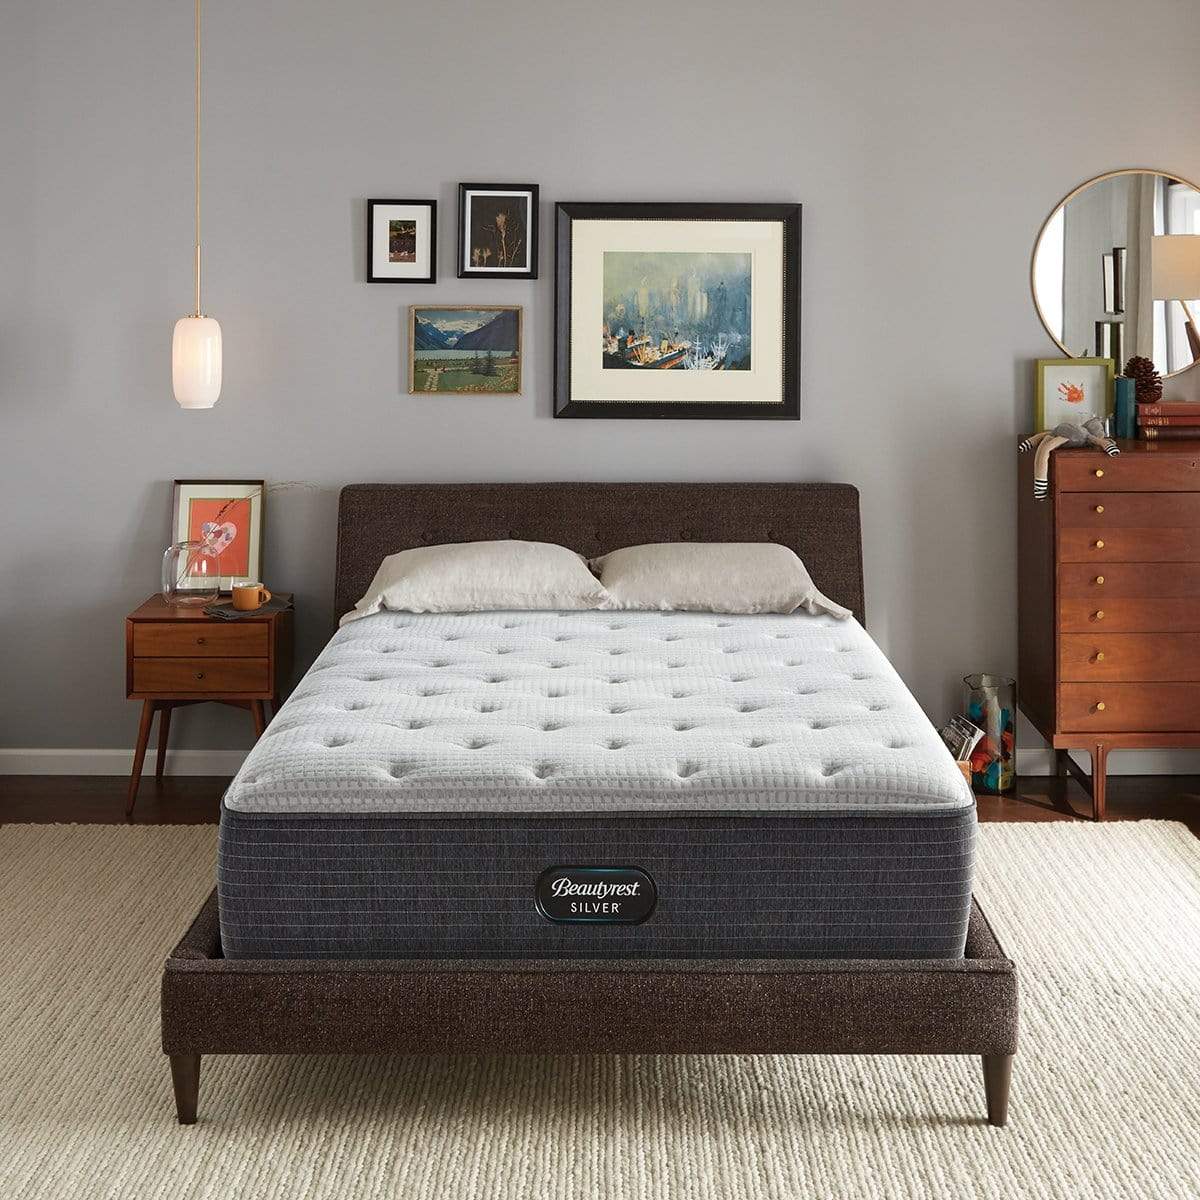 Picture of Beautyrest Silver® BRS900-C Plush Mattress